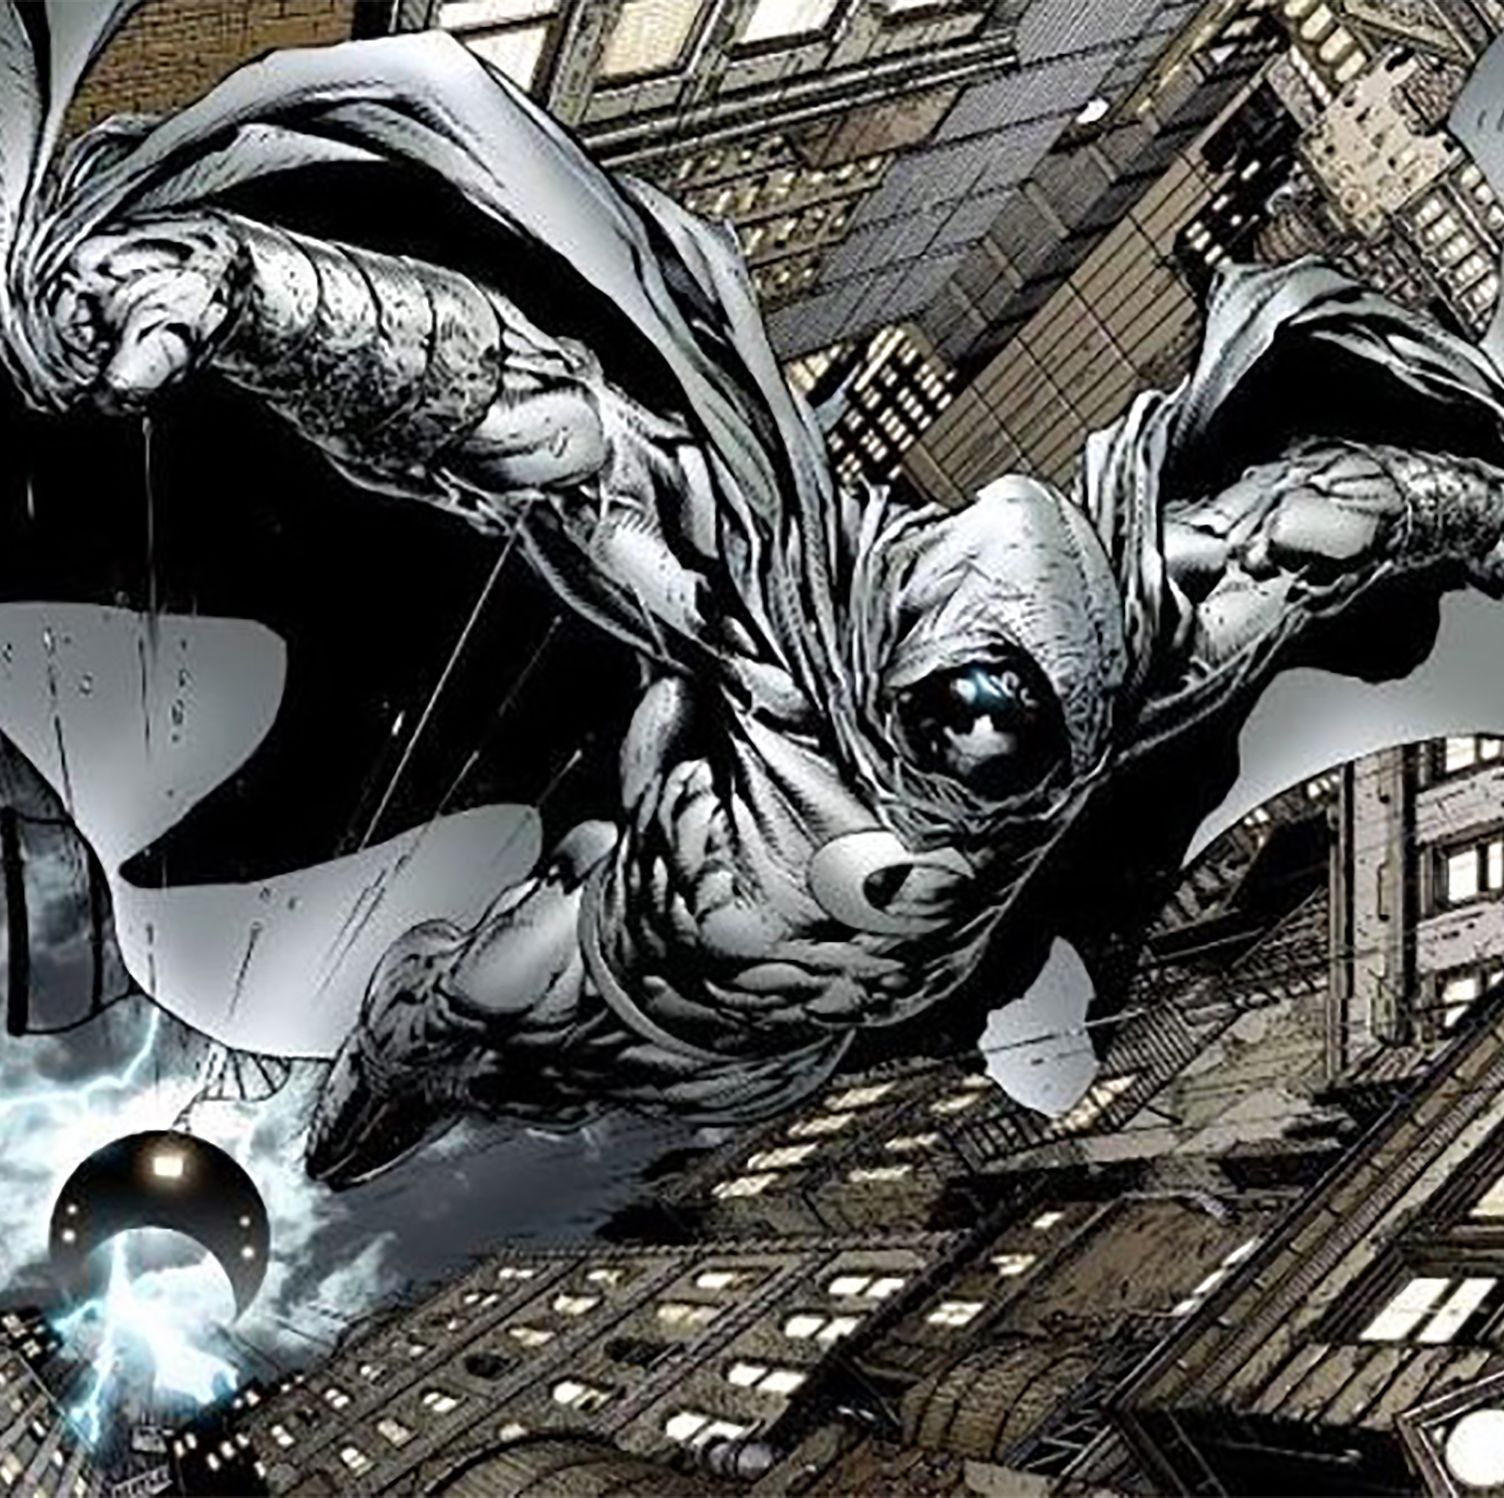 Moon Knight TV show air date, cast, plot, trailer and more